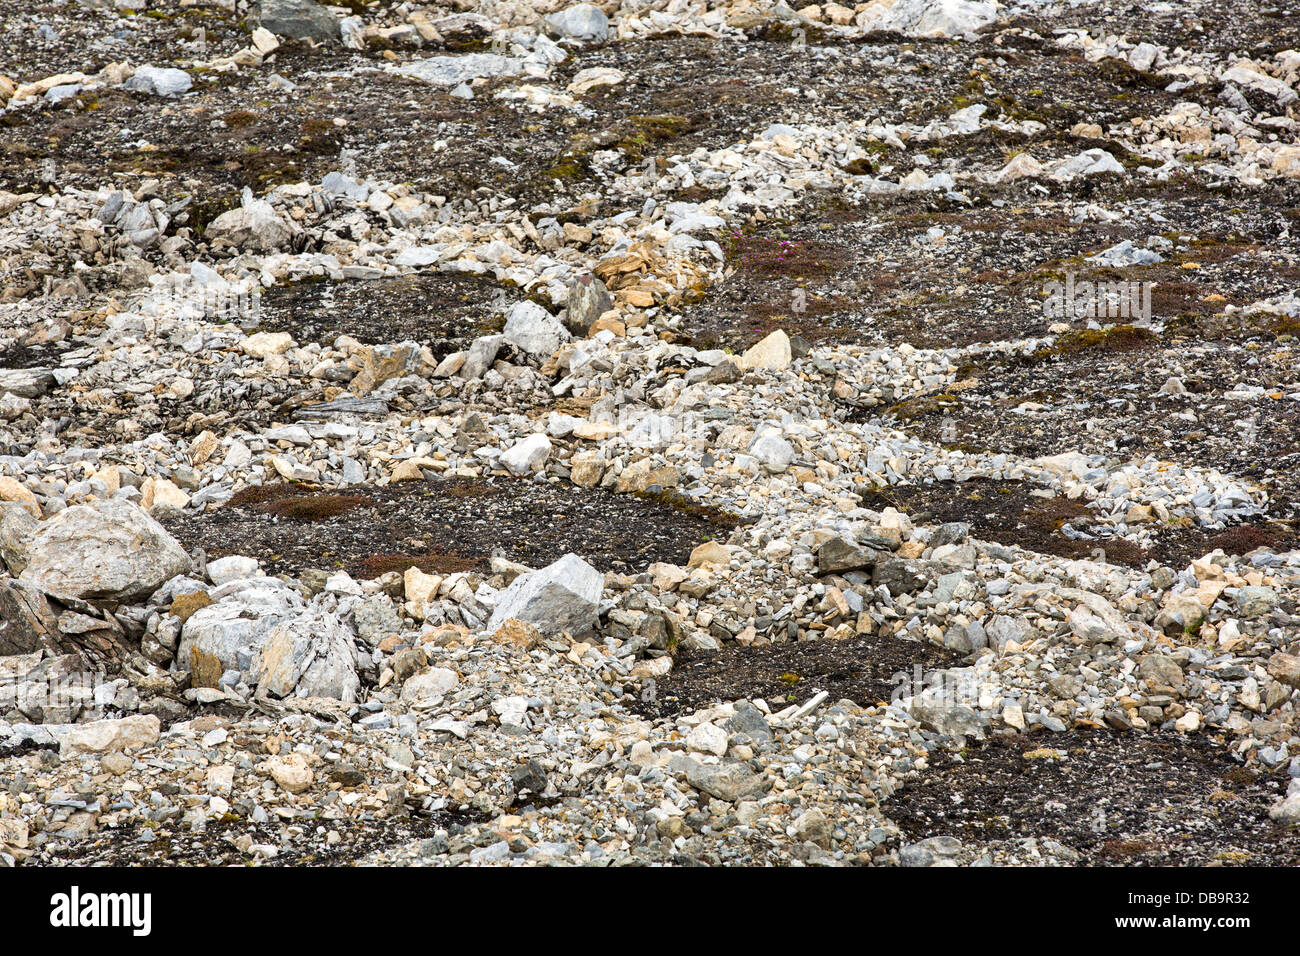 Patterned ground and stone circles formed above permafrost in the high Arctic on Spitsbergen, Svalbard. Stock Photo